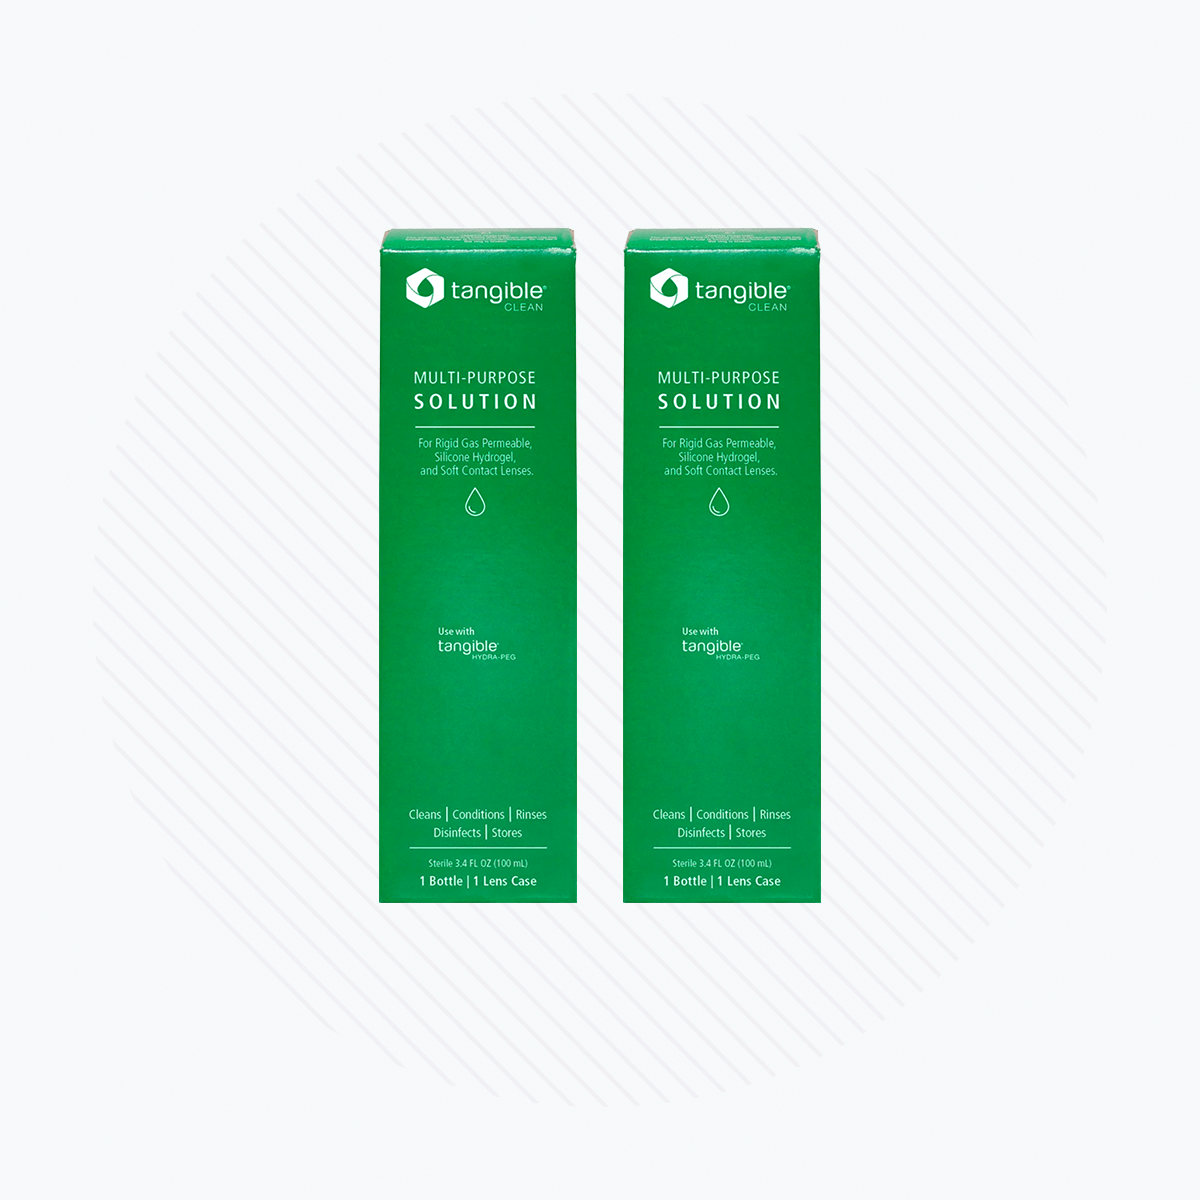 Tangible Clean - Scleral and Contact Lens Multi-Purpose Solution (3.4oz Travel Size) 2-Pack - Dryeye Rescue